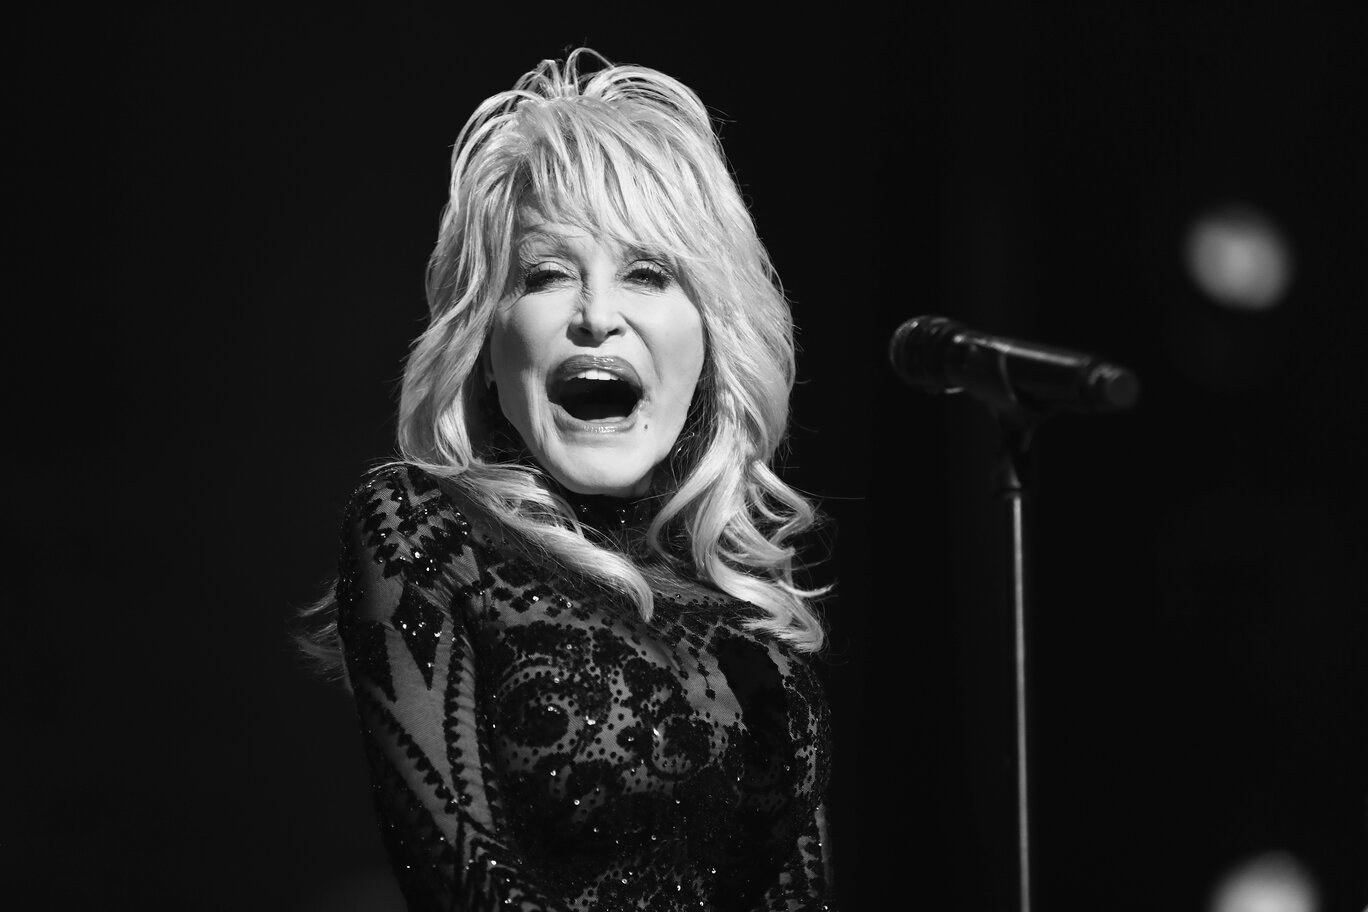 A black and white close-up of Dolly Parton singing into a microphone.